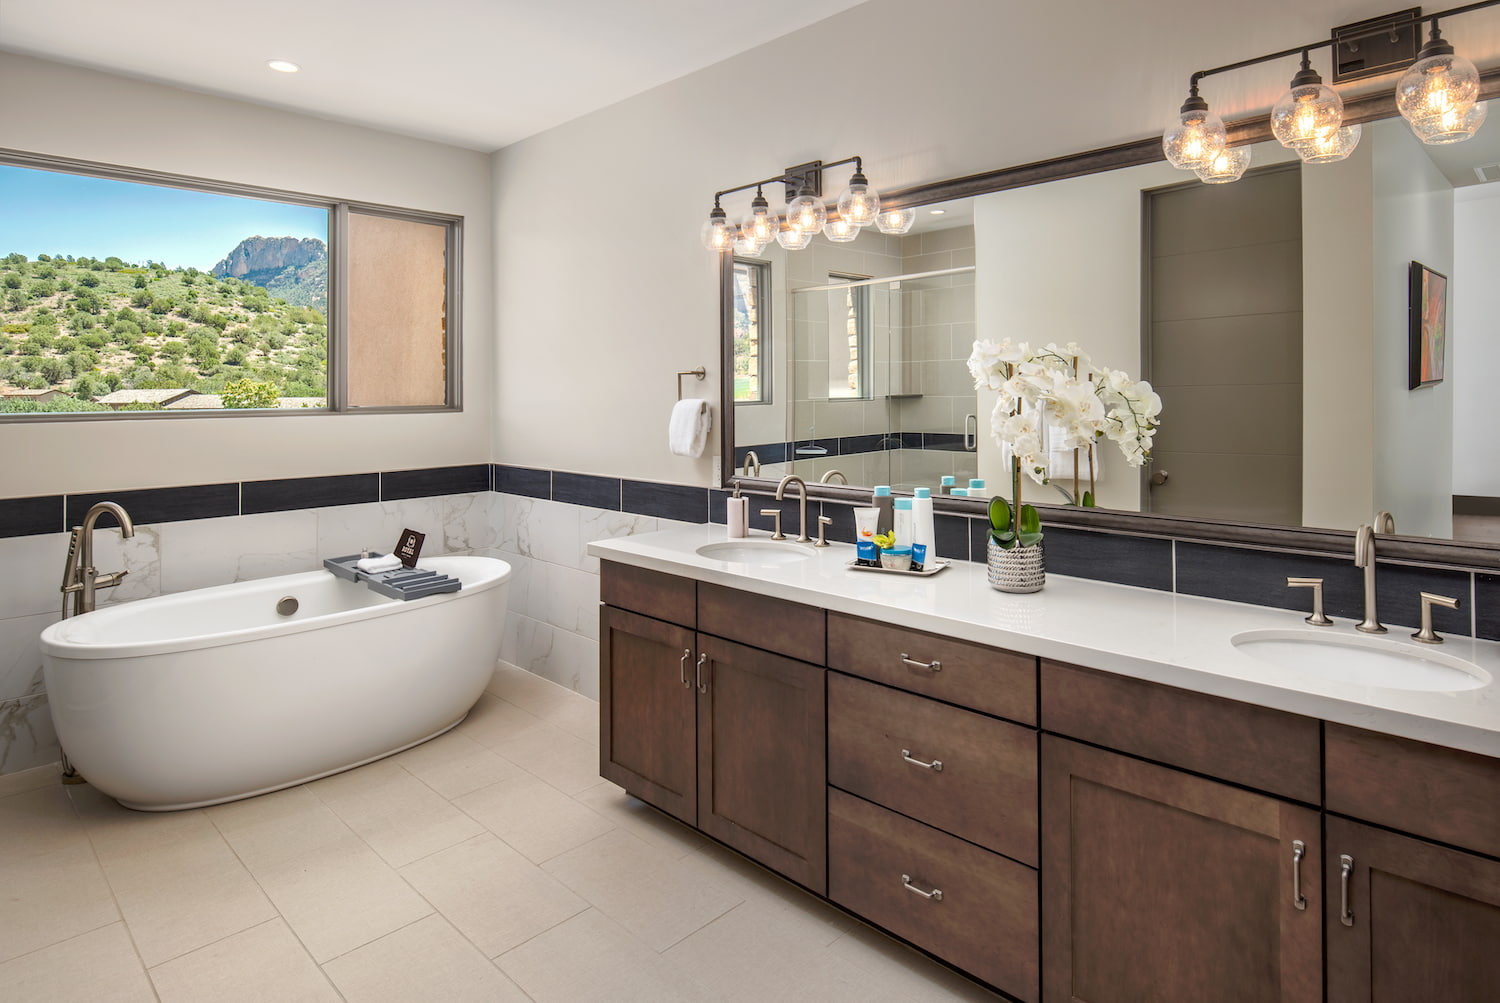 Luxury bathroom with dual vanity, modern soaking tub, and a view of the mountains.